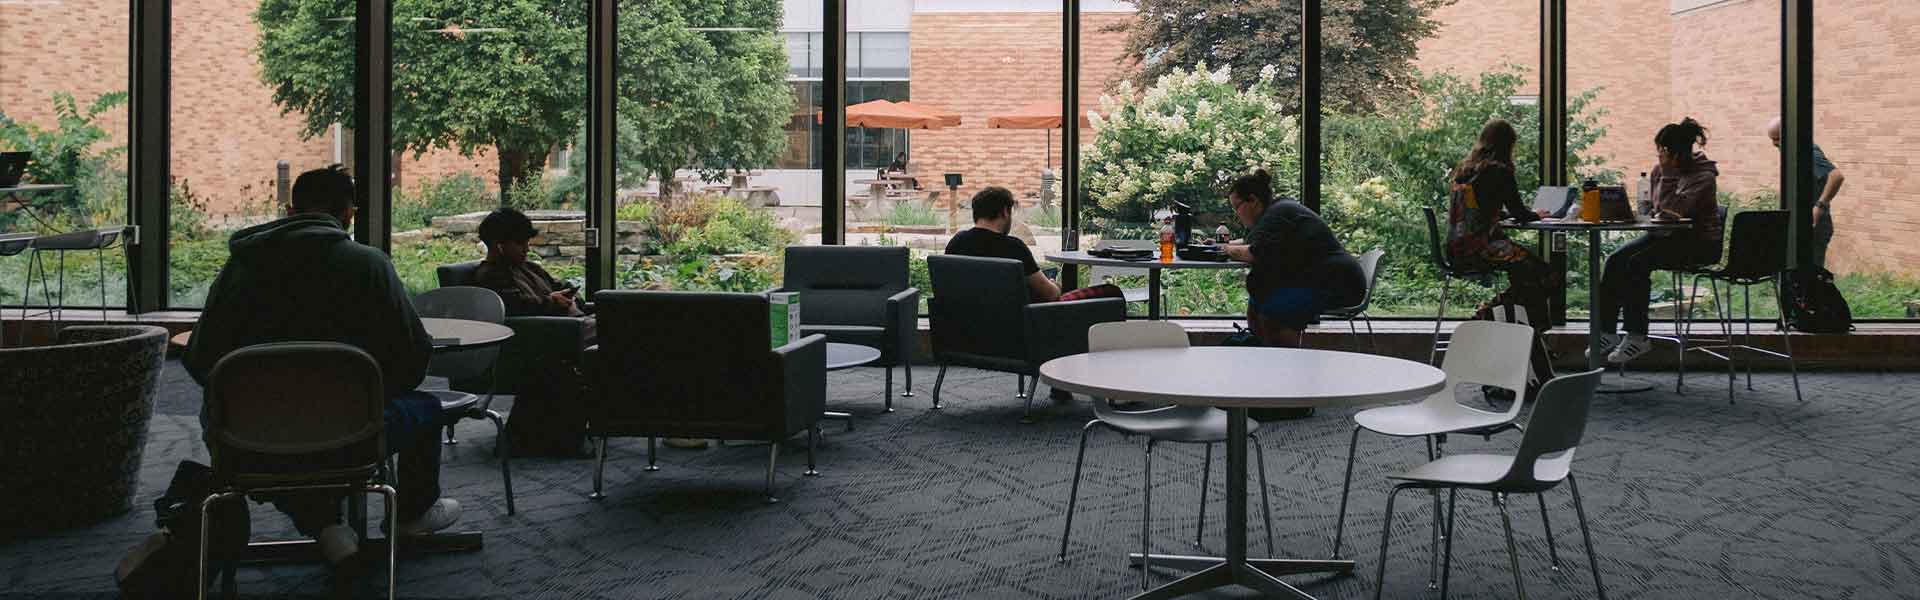 Students studying at different tables in a common area in front of a wall of windows